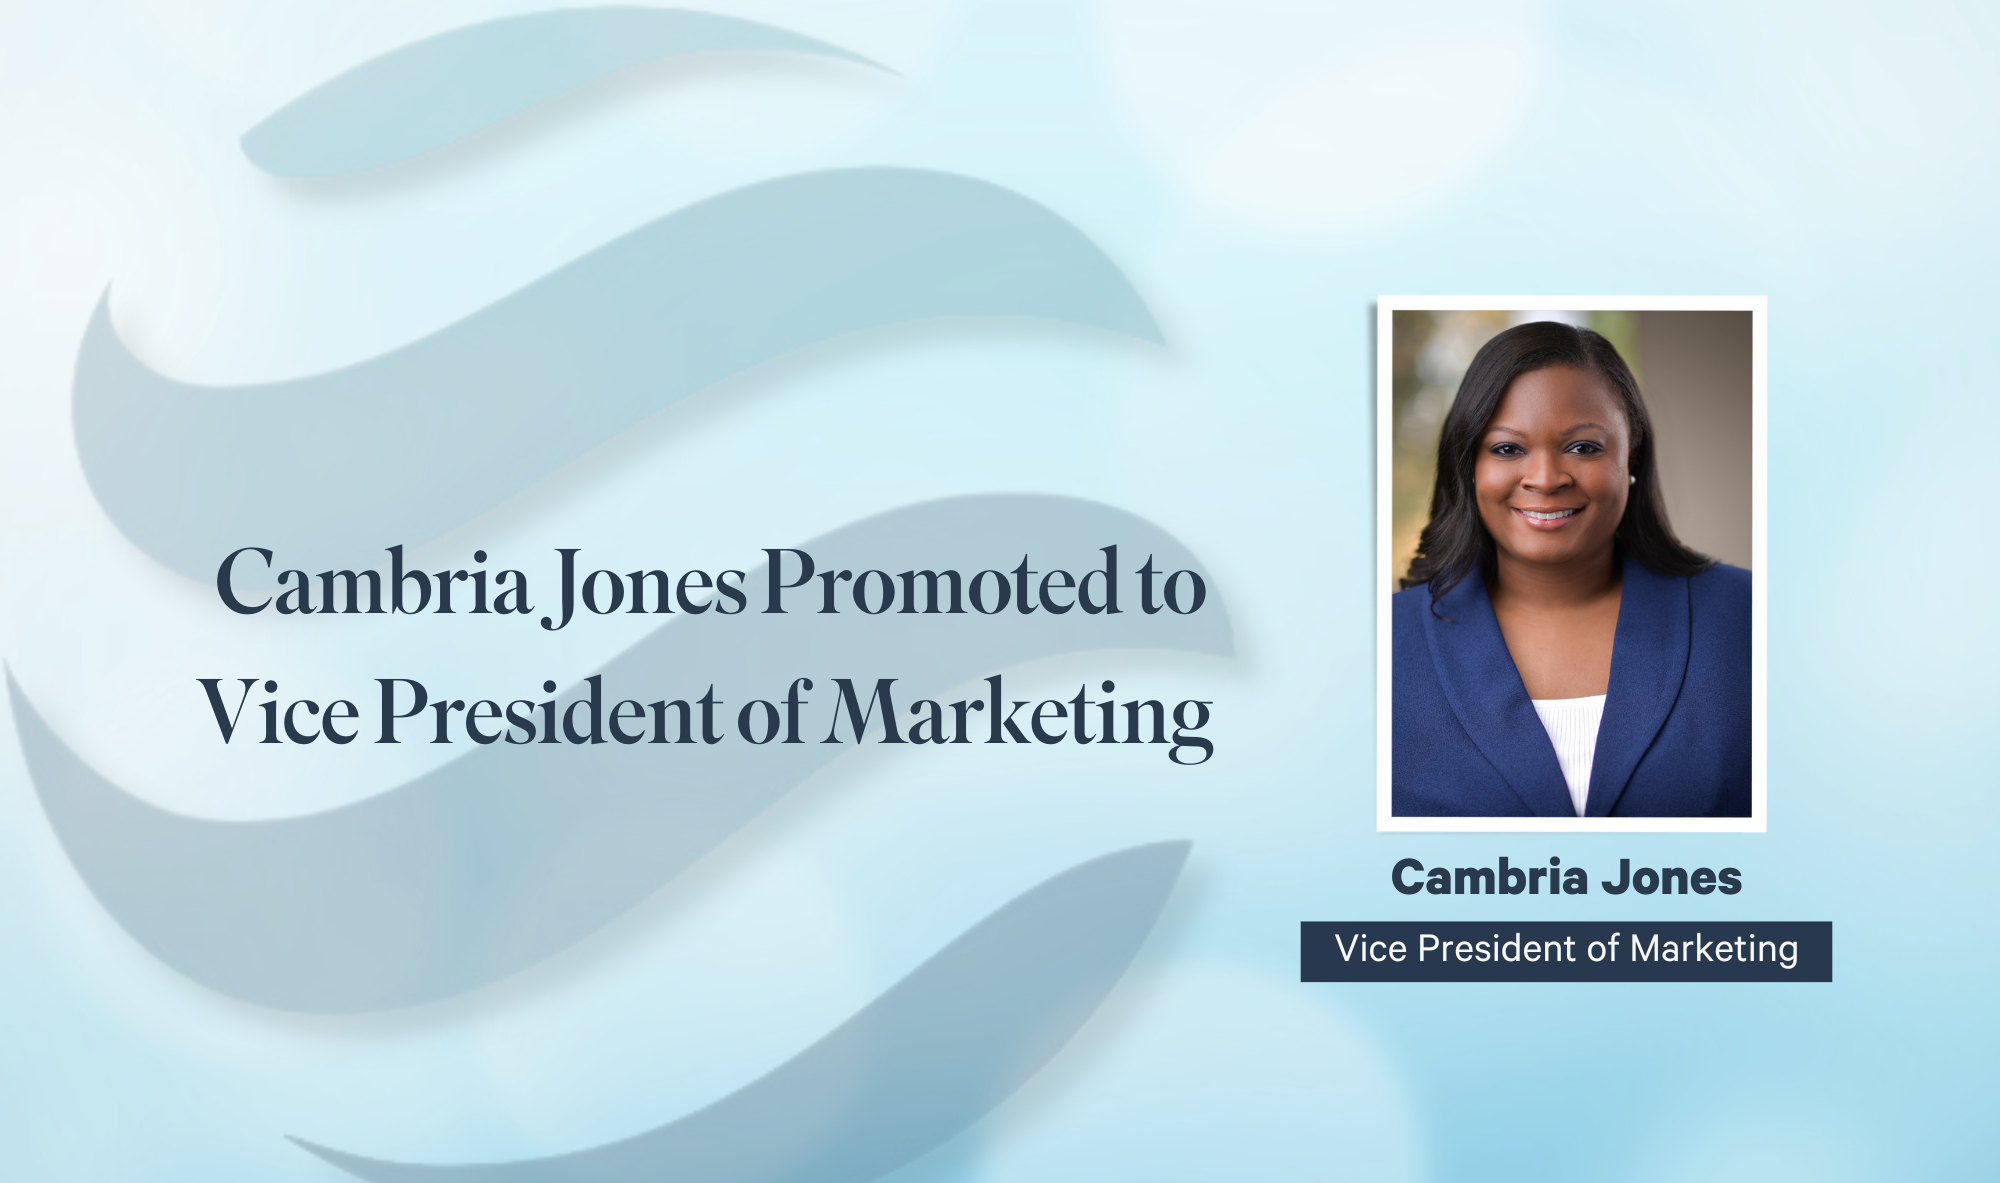 SearchWide Global Announces Promotion of Cambria Jones to Vice President of Marketing